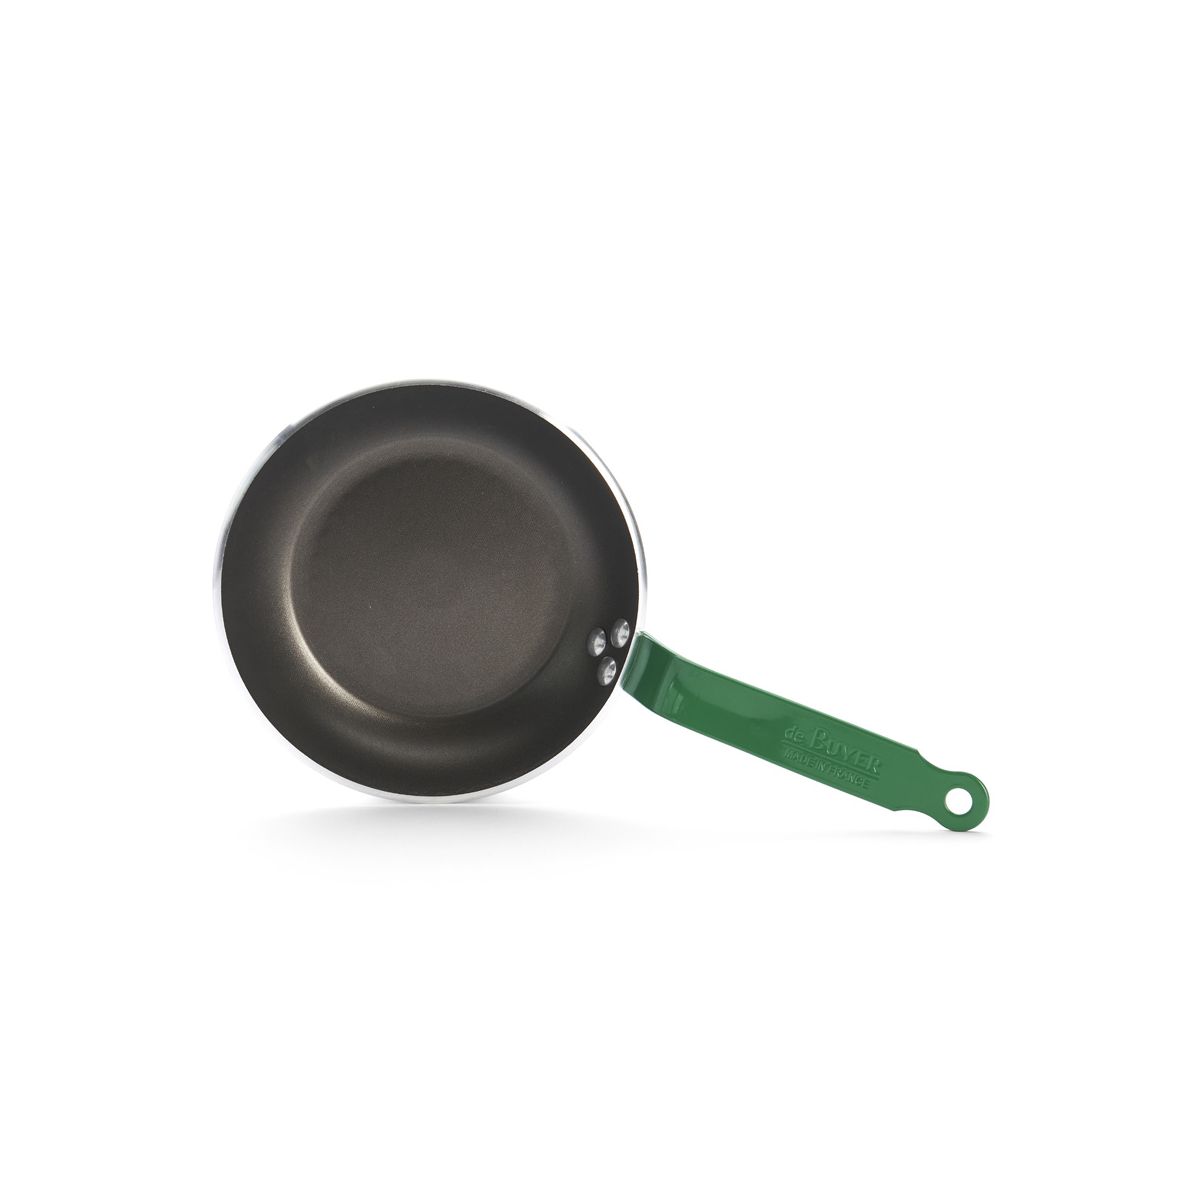  Fundix by Castey Nonstick Cast Aluminium Induction Fry Pan with  Removable Kiwi Handle, 8-Inch: Chefs Pans: Home & Kitchen